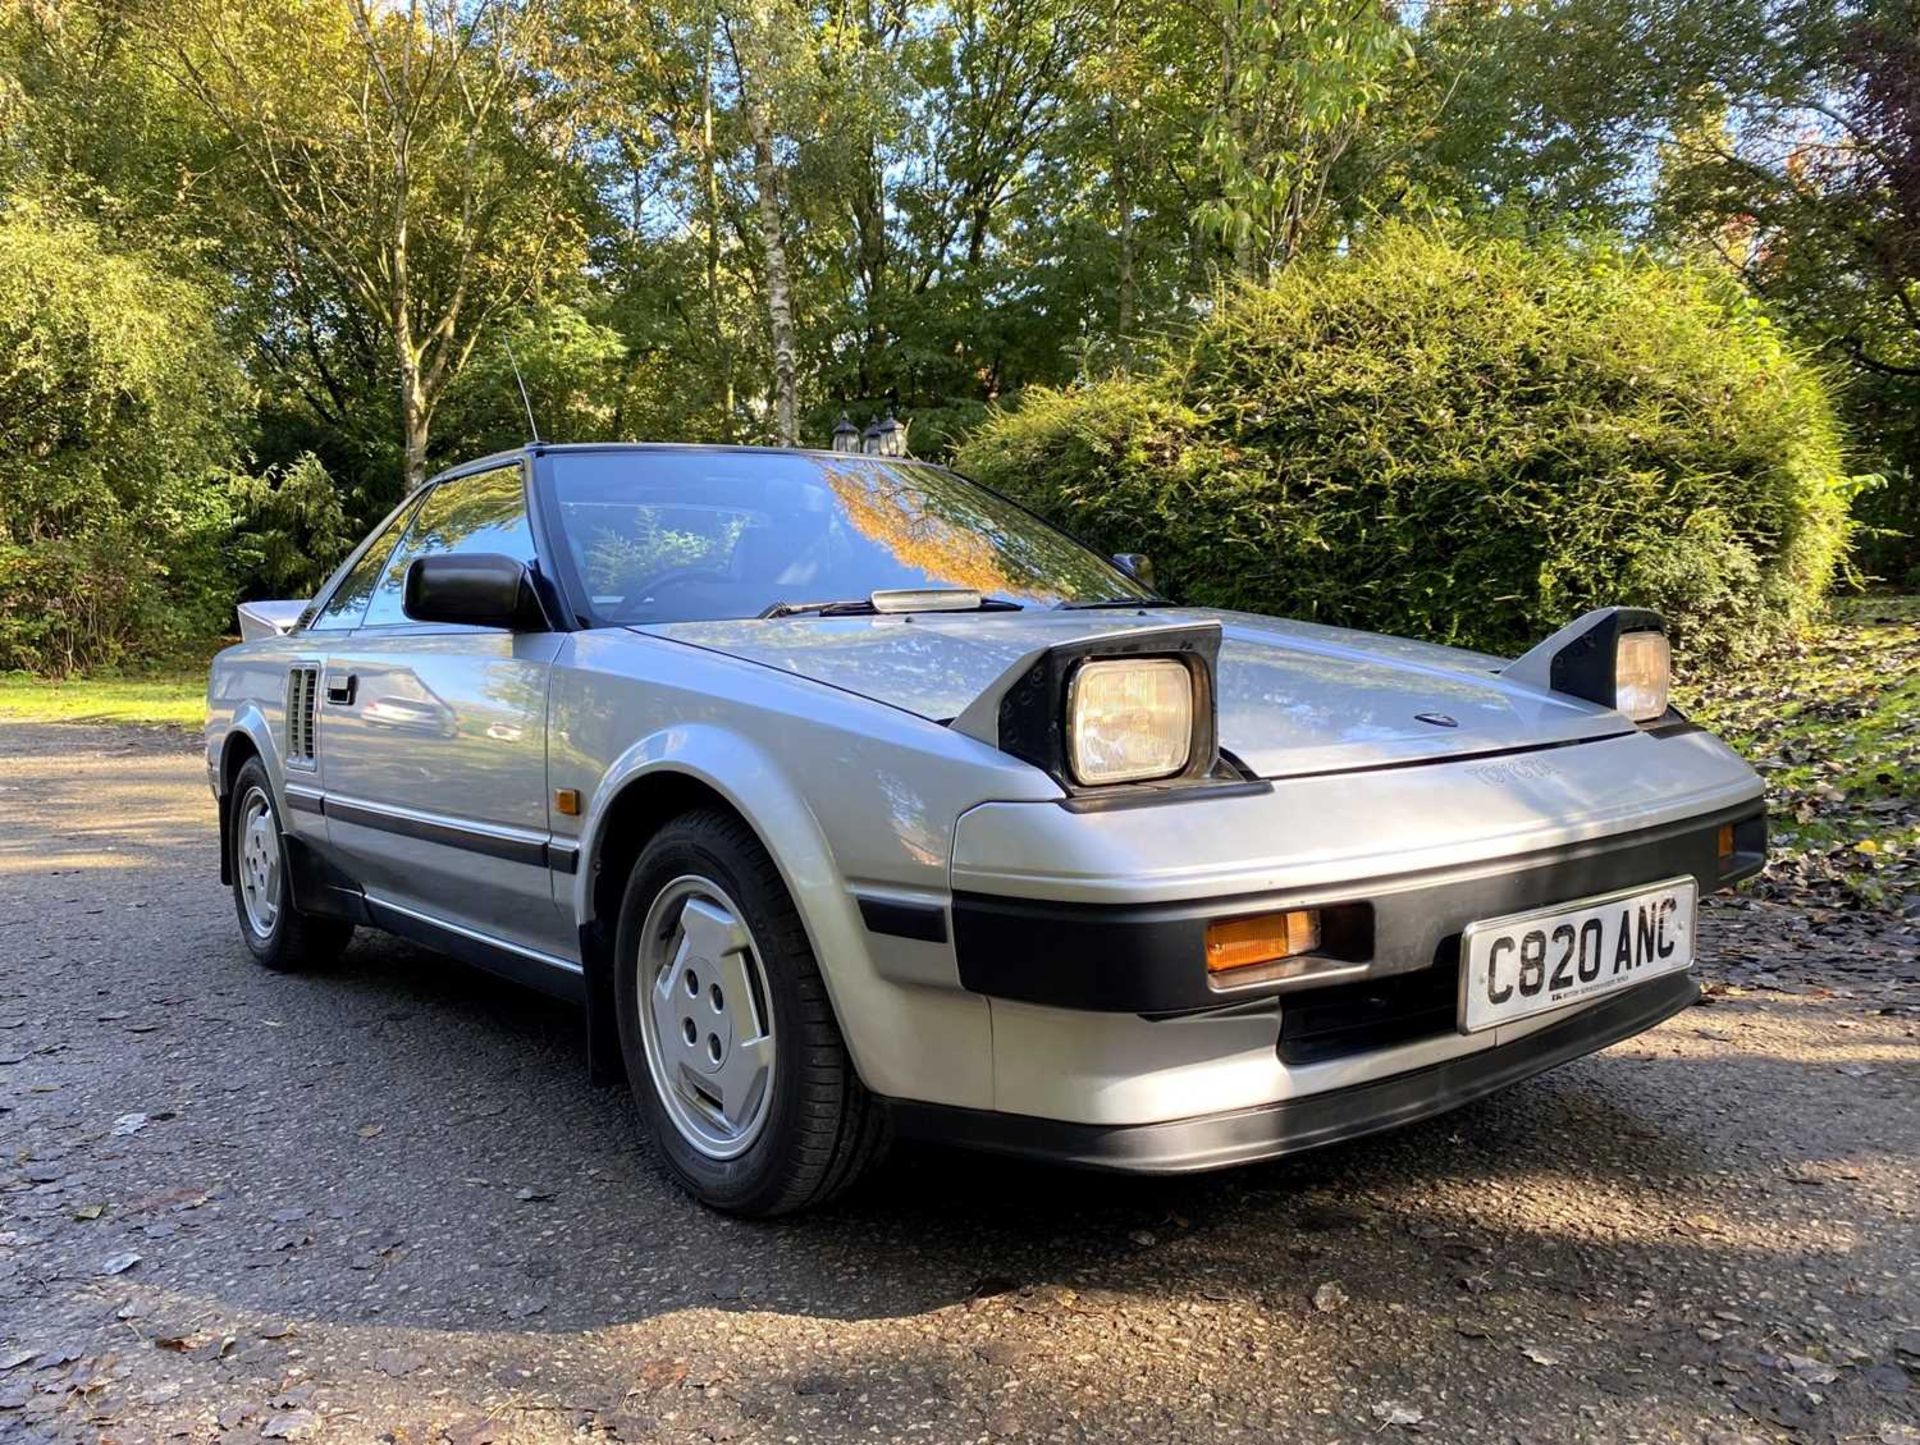 1985 Toyota MR2 Coupe Restored example of an appreciating modern classic - Image 3 of 100